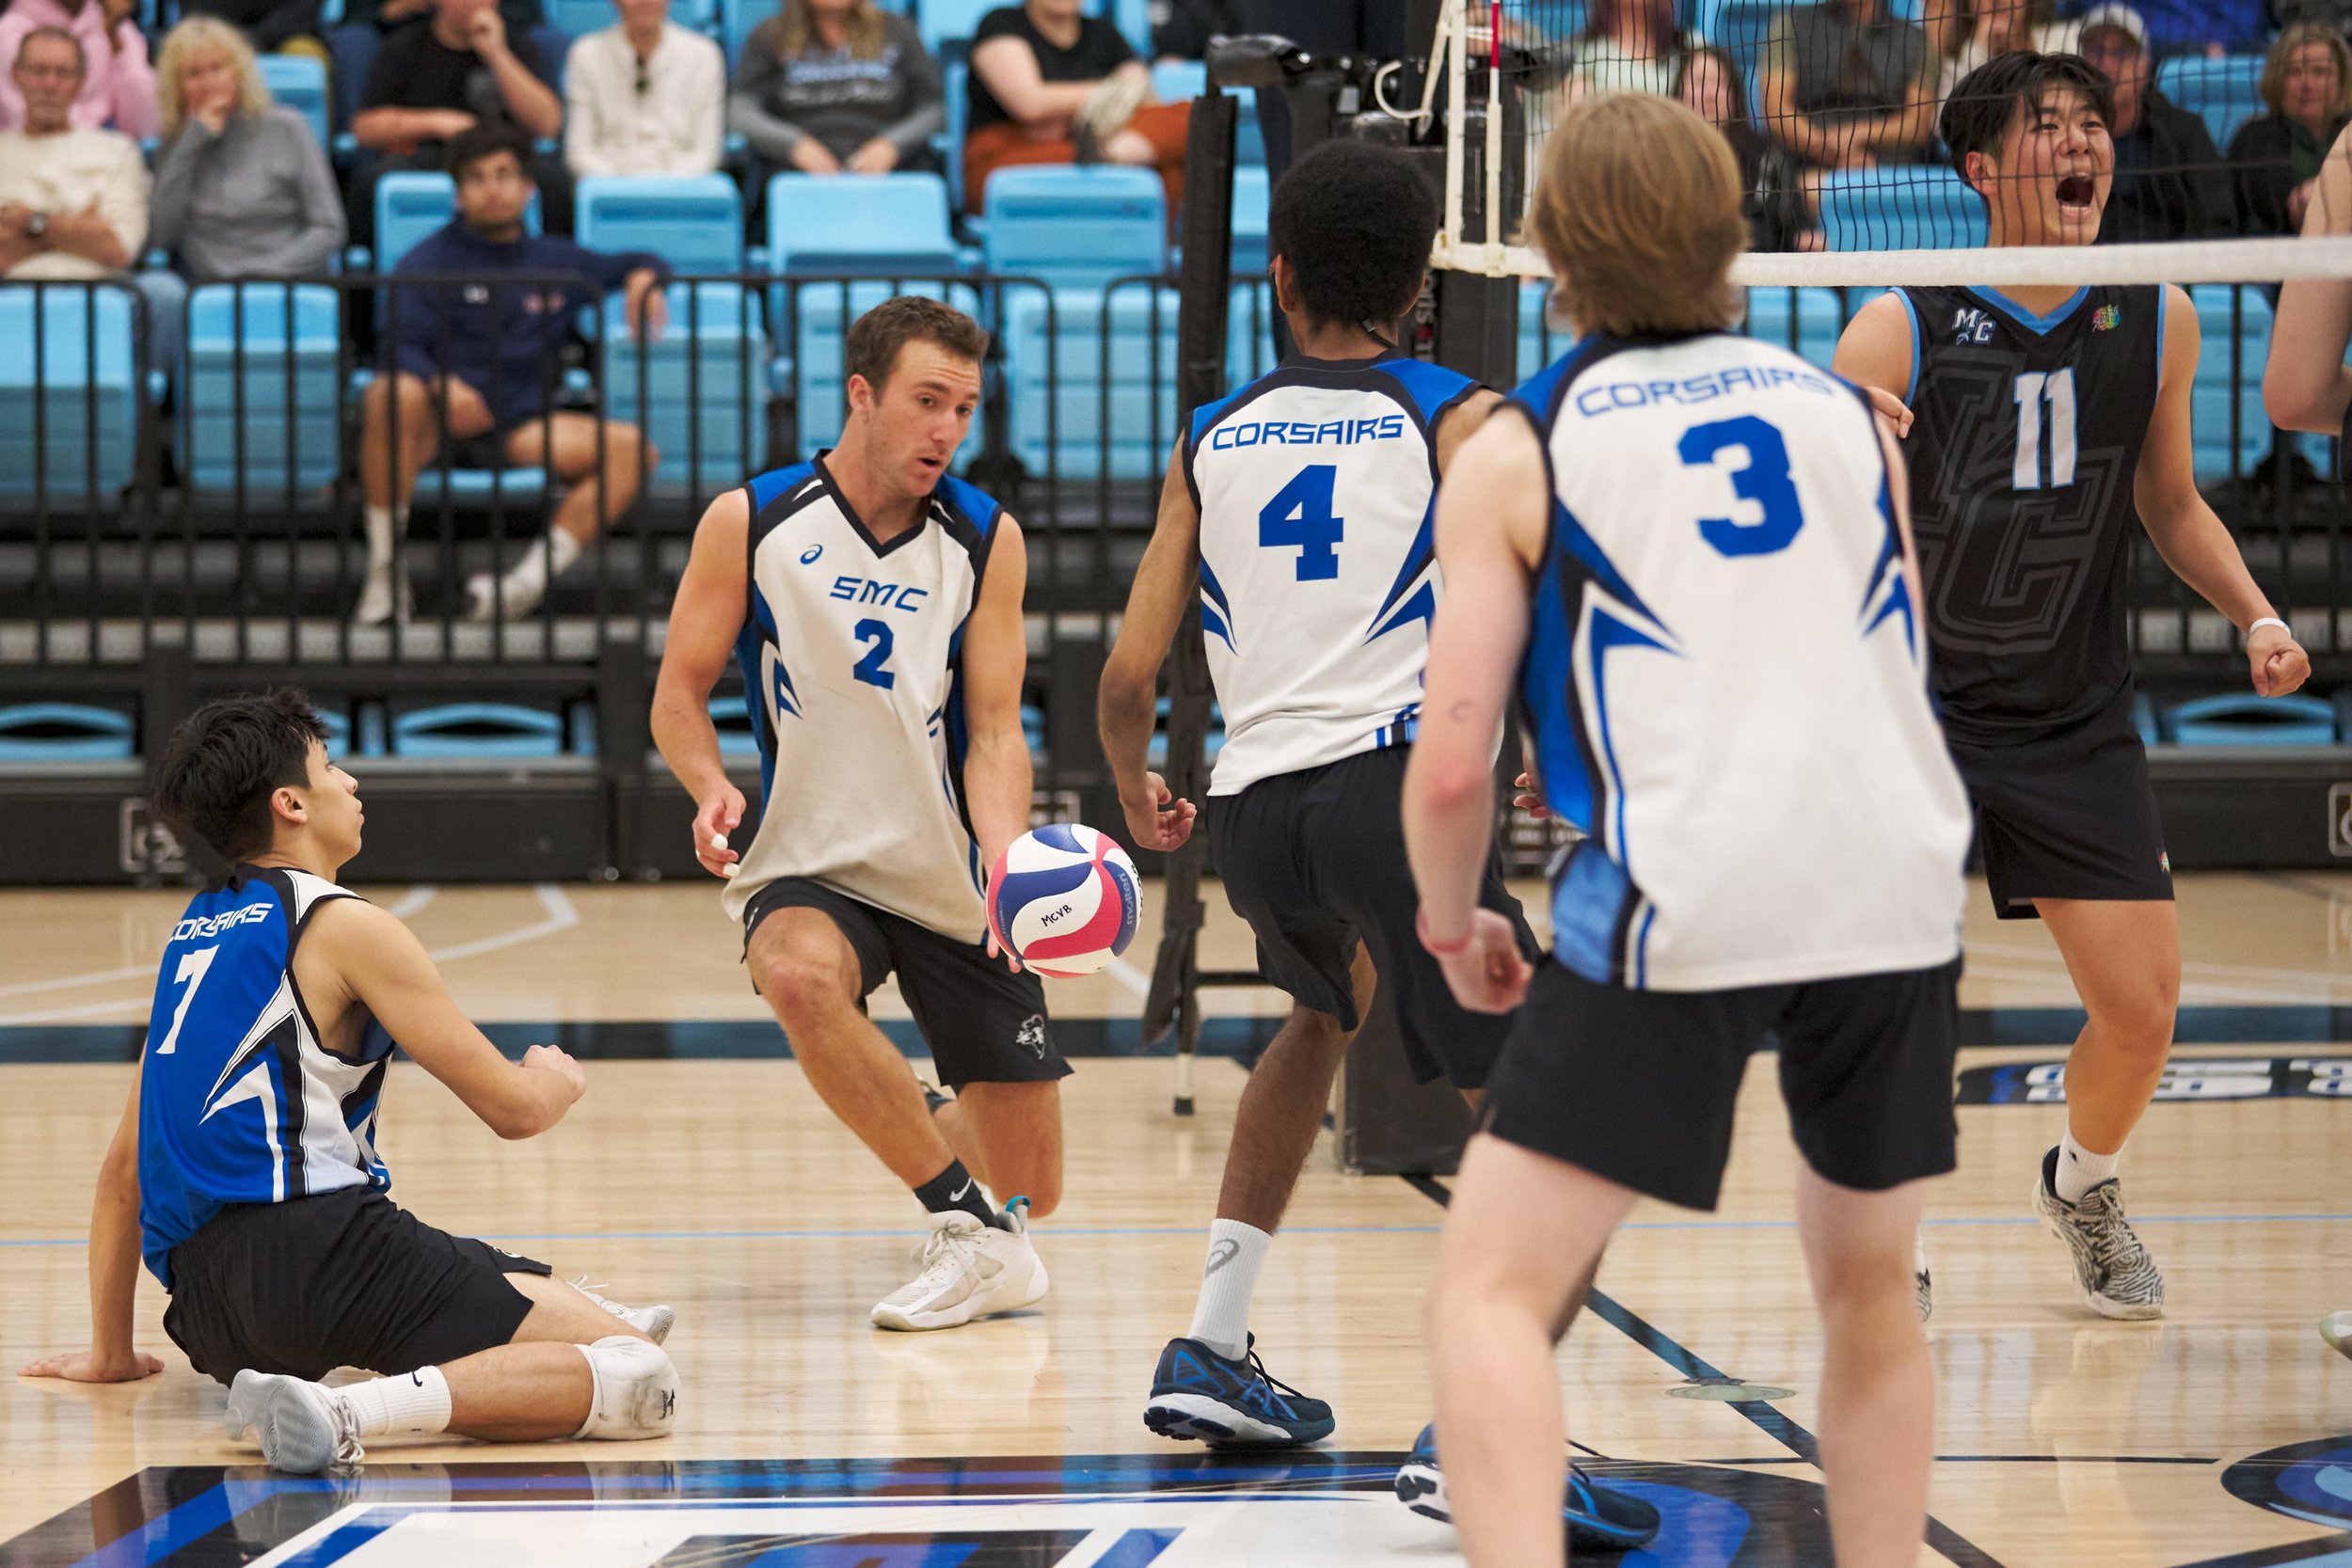  Santa Monica College Corsairs' Javier Castillo, Kane Schwengel, Beikwaw Yankey, and Camden Higbee drop the ball, while Moorpark College Raiders' Eddy He cheers during the men's volleyball match on Friday, March 17, 2023, at Moorpark College's Gymnas